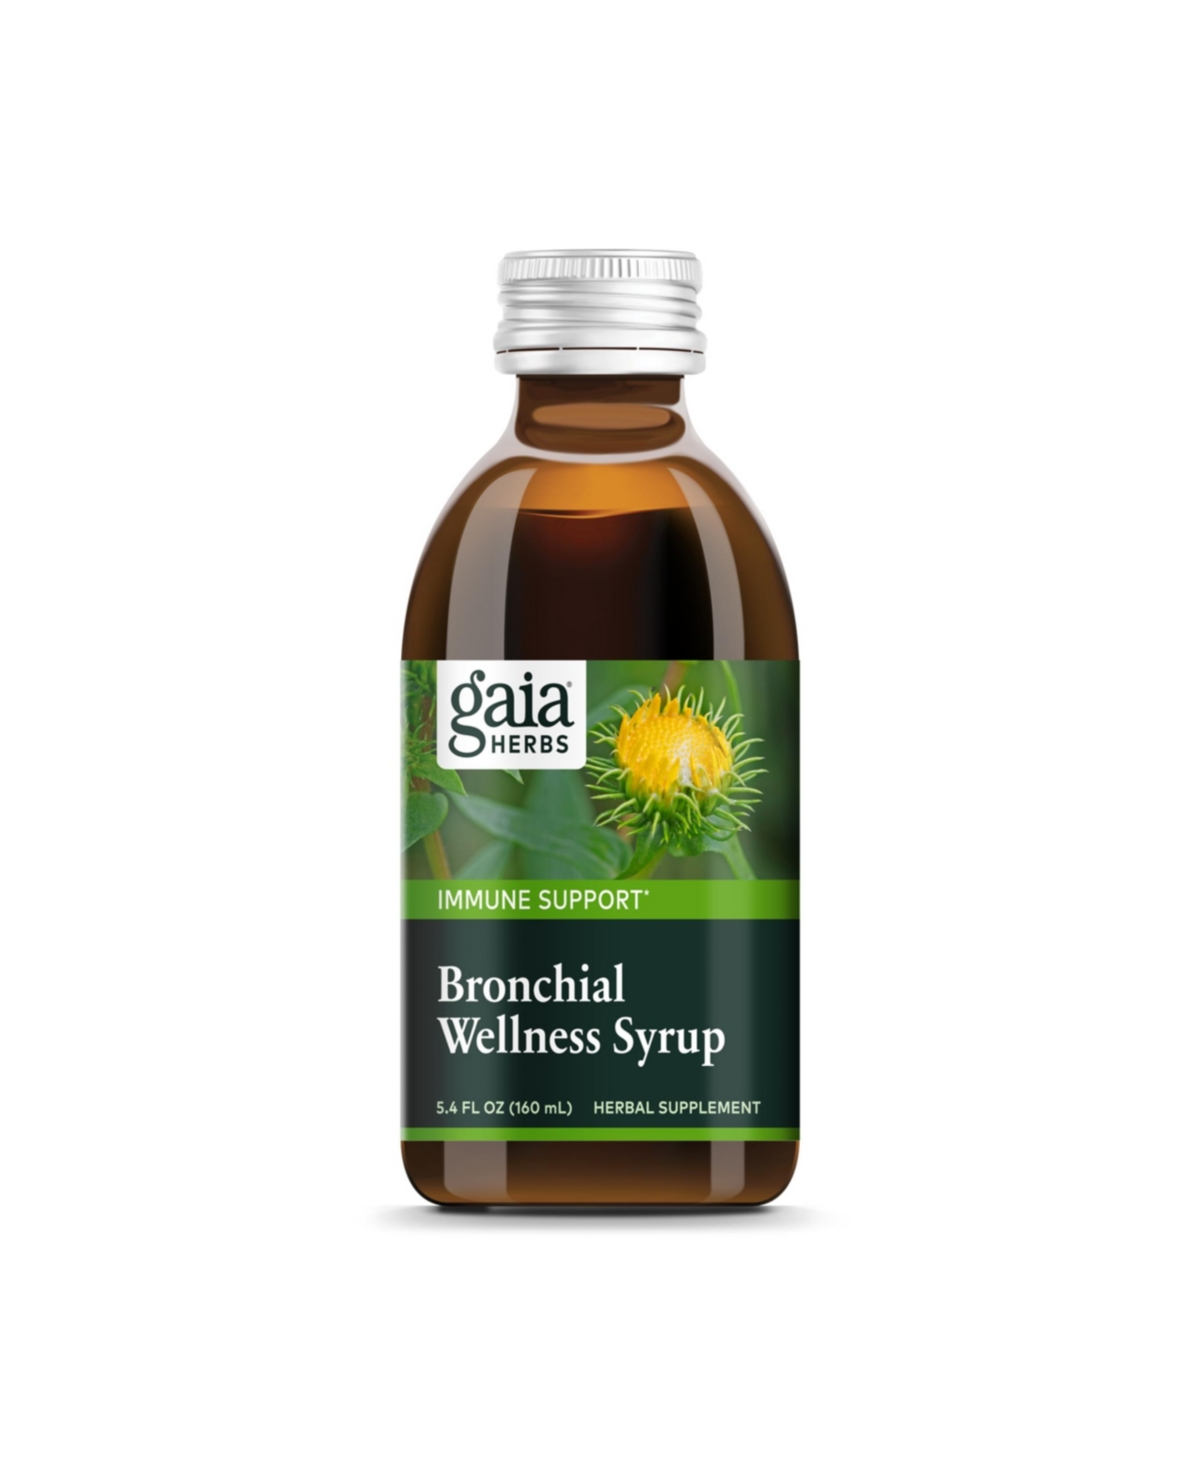 Bronchial Wellness Syrup - Immune Support Supplement to Help Maintain Lung Health and Help Provide Comfort for Occasional Sore Throat - 5.4